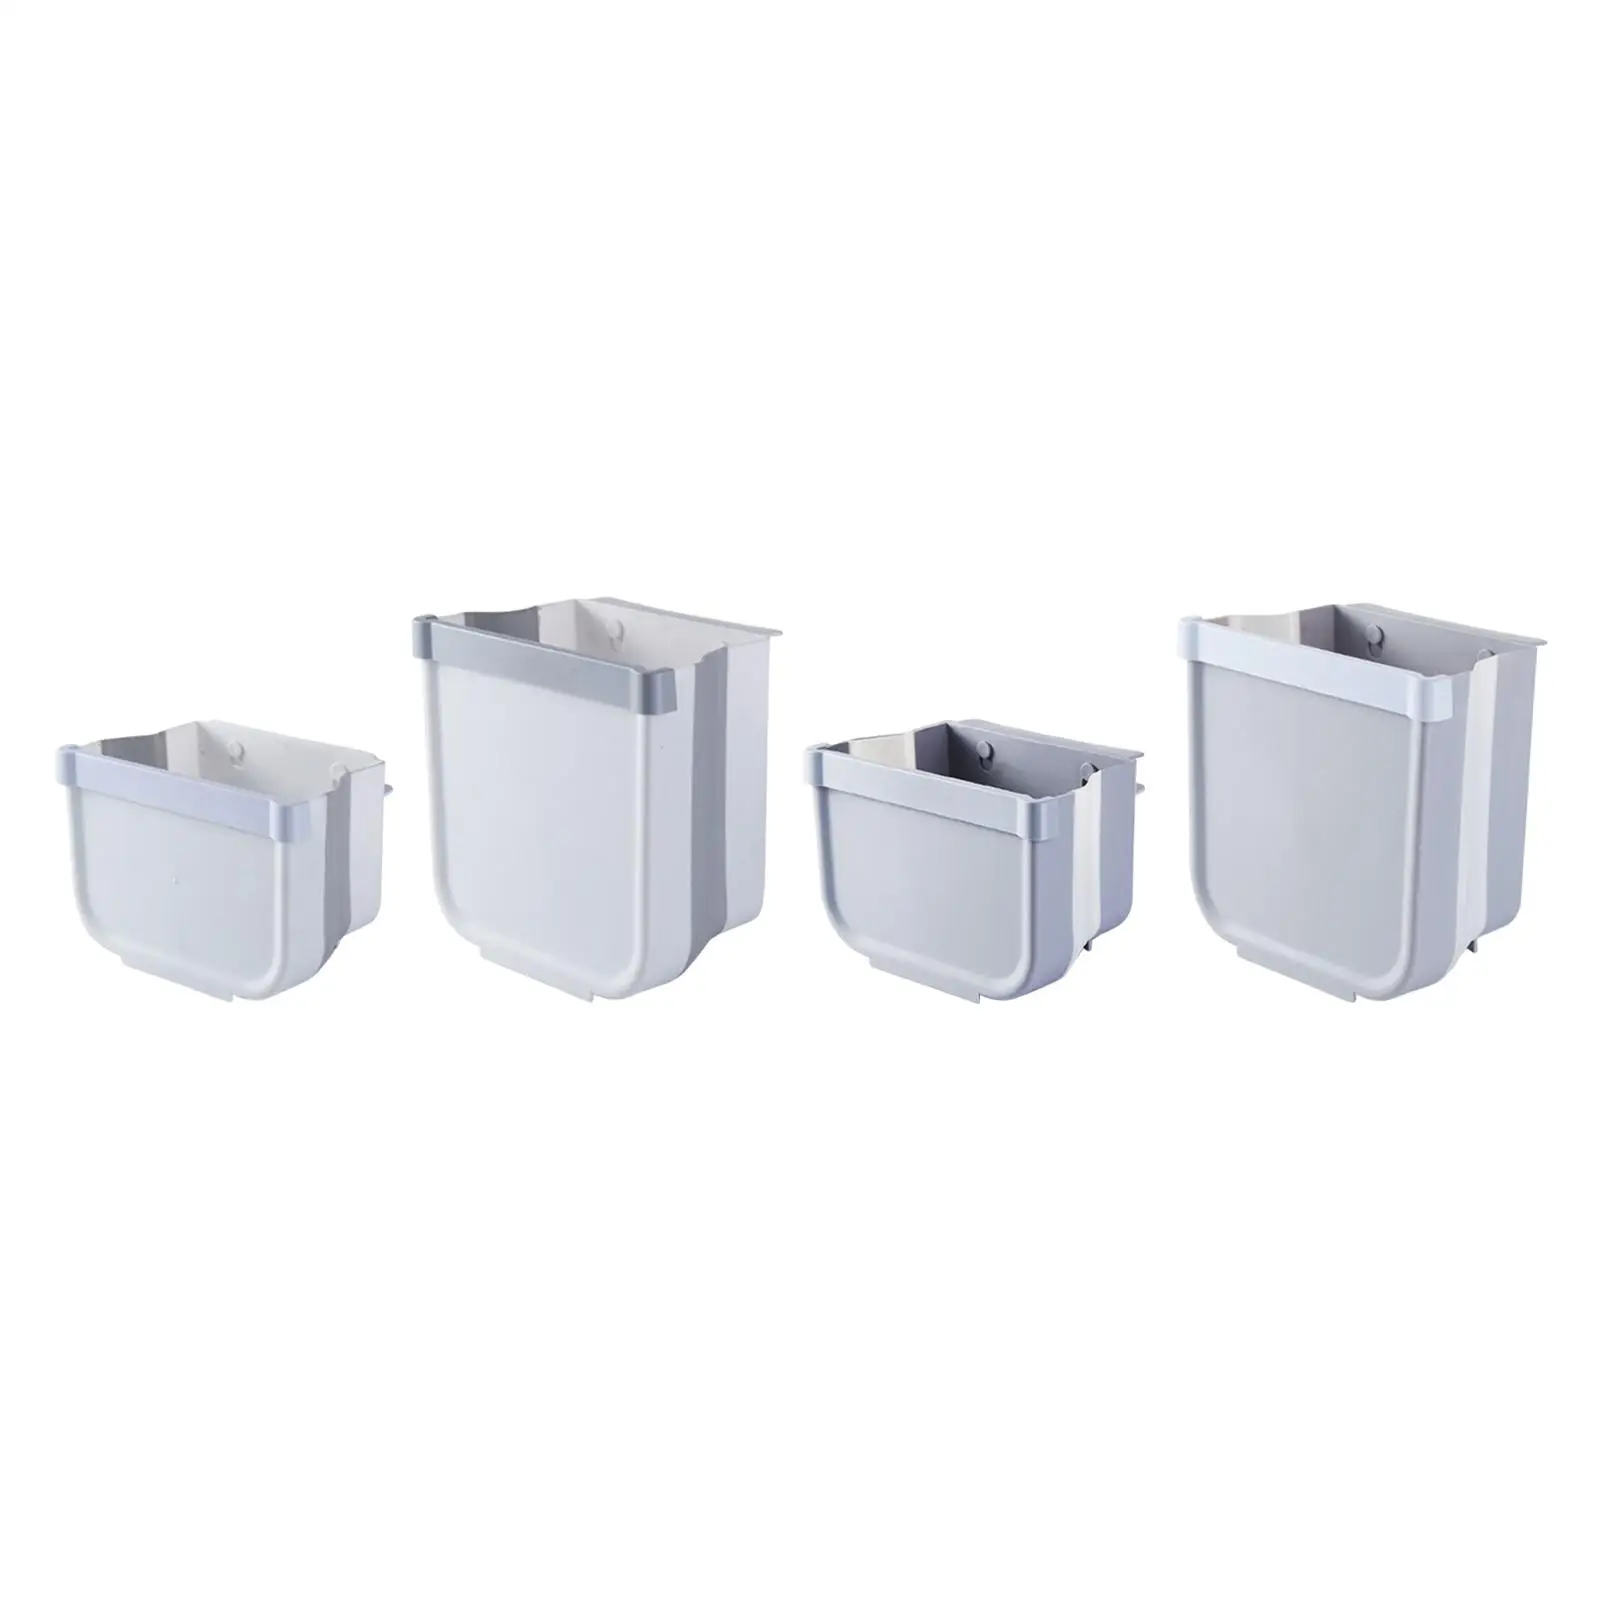 Foldable Wall Mounted Trash Can Dustbin Garbage Can Waste Basket Hanging Waste Bin Small for Cabinet Car Camping Countertop Door